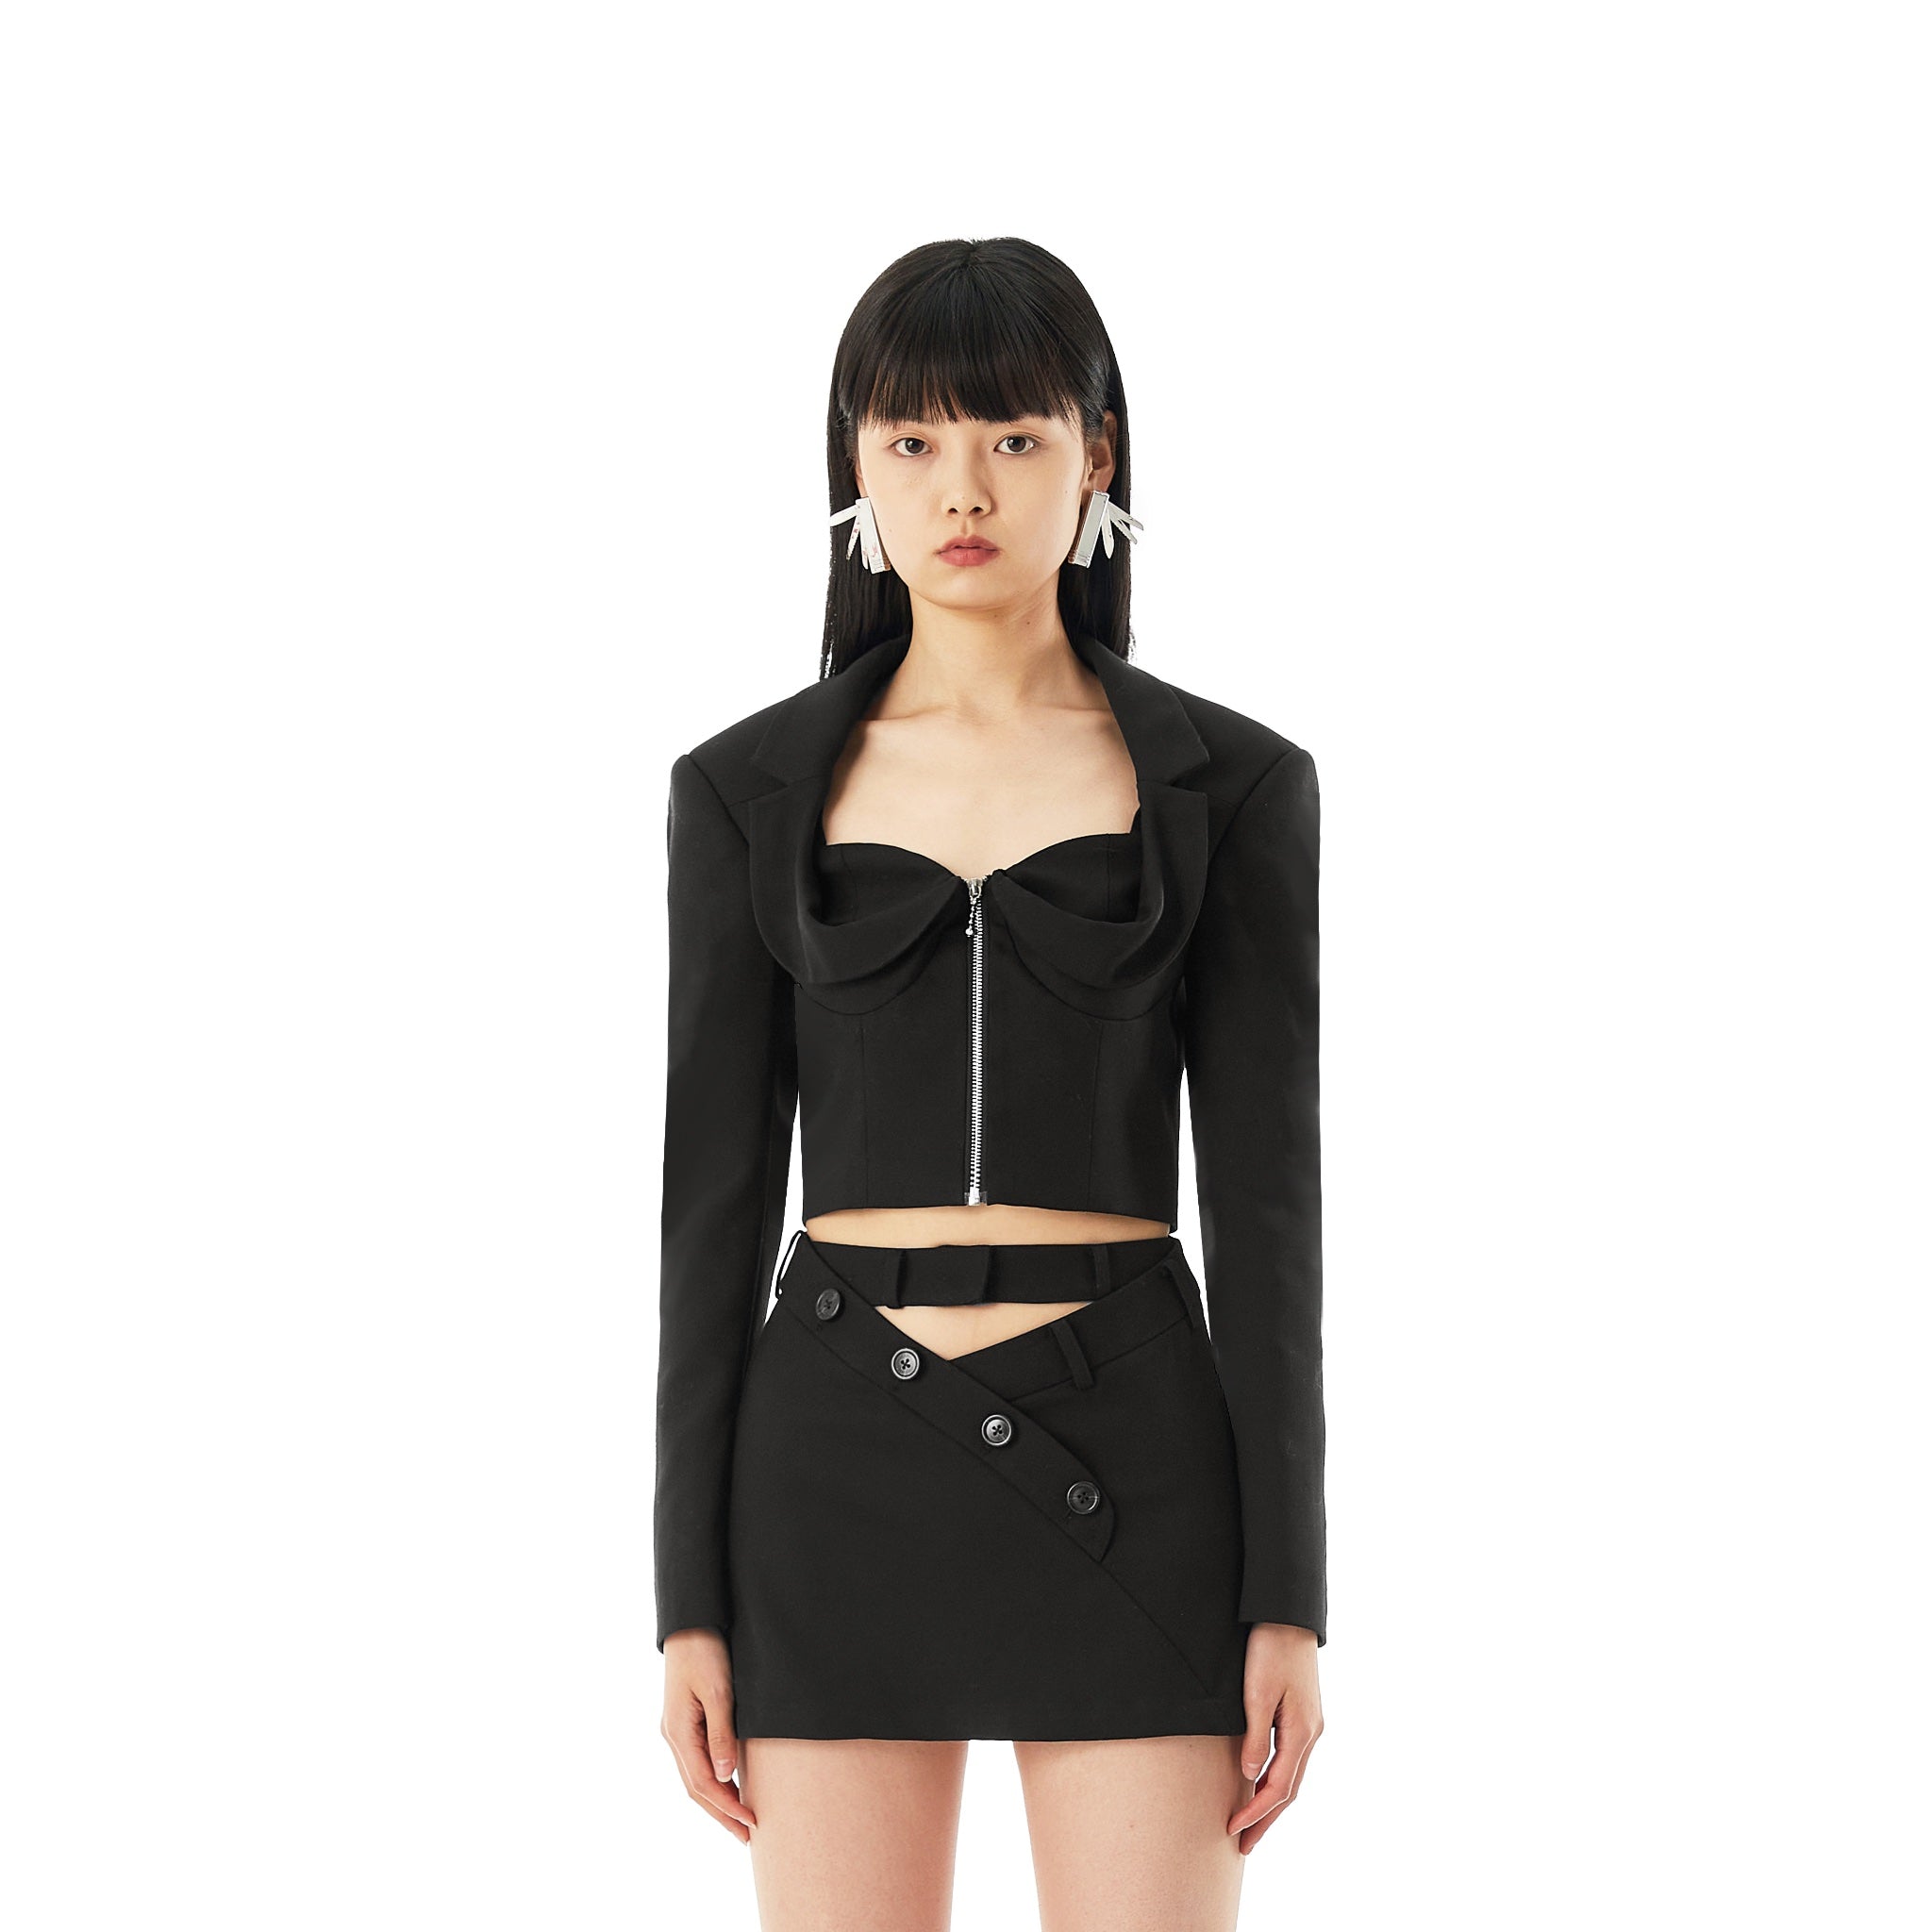 MARRKNULL Black Corset Suit Jacket | MADA IN CHINA